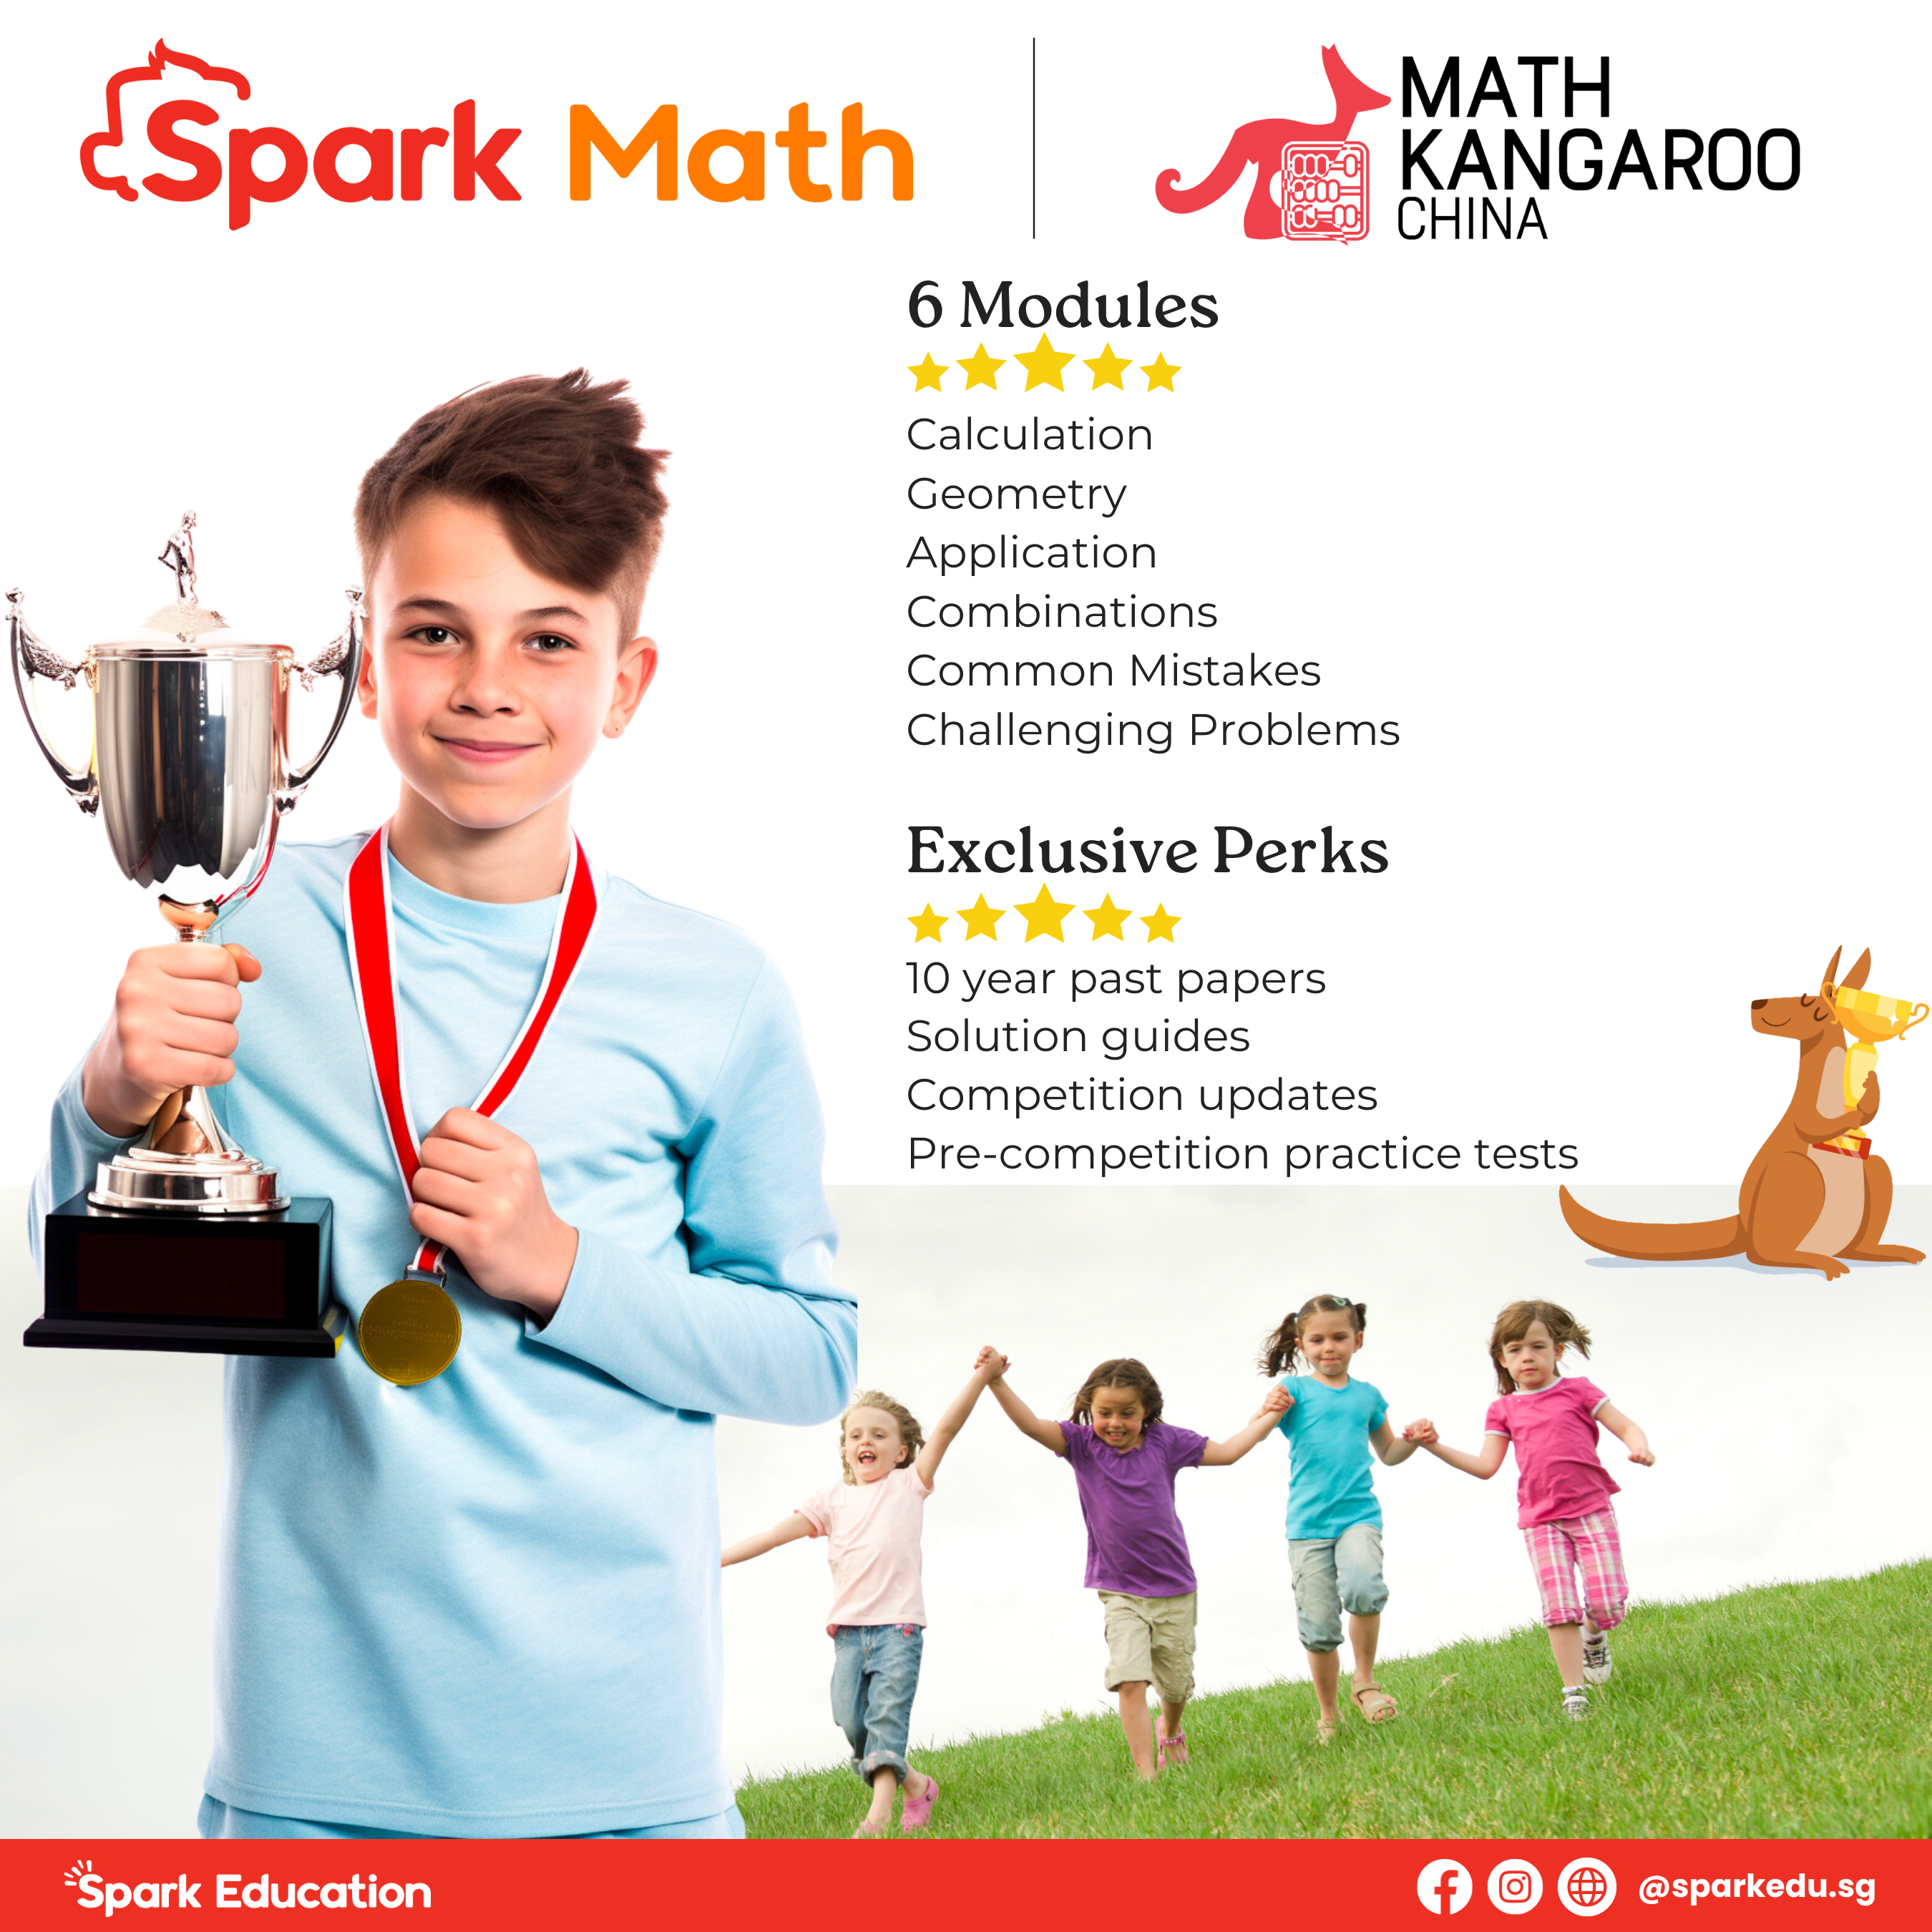 Spark Education's online course for Math Kangaroo